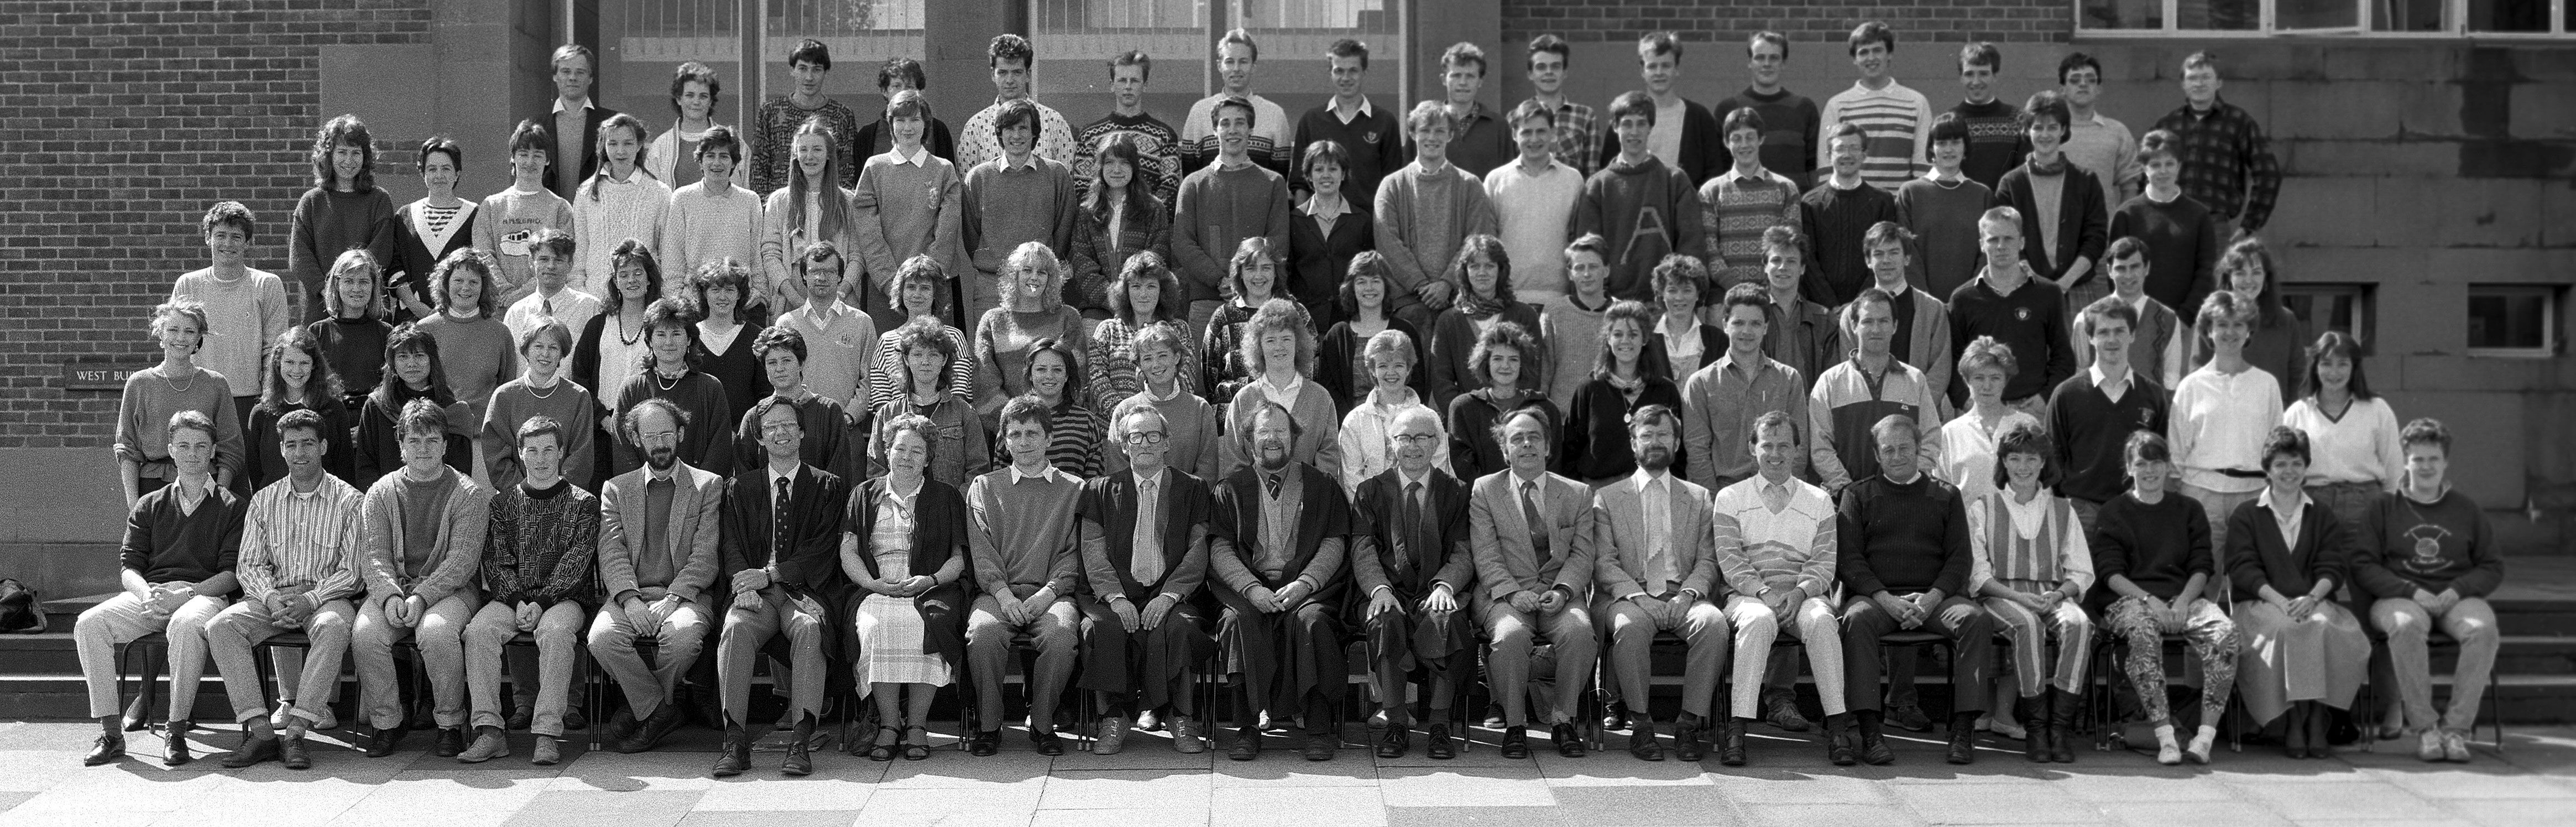 Geography Department Undergraduate Group photo from 1987